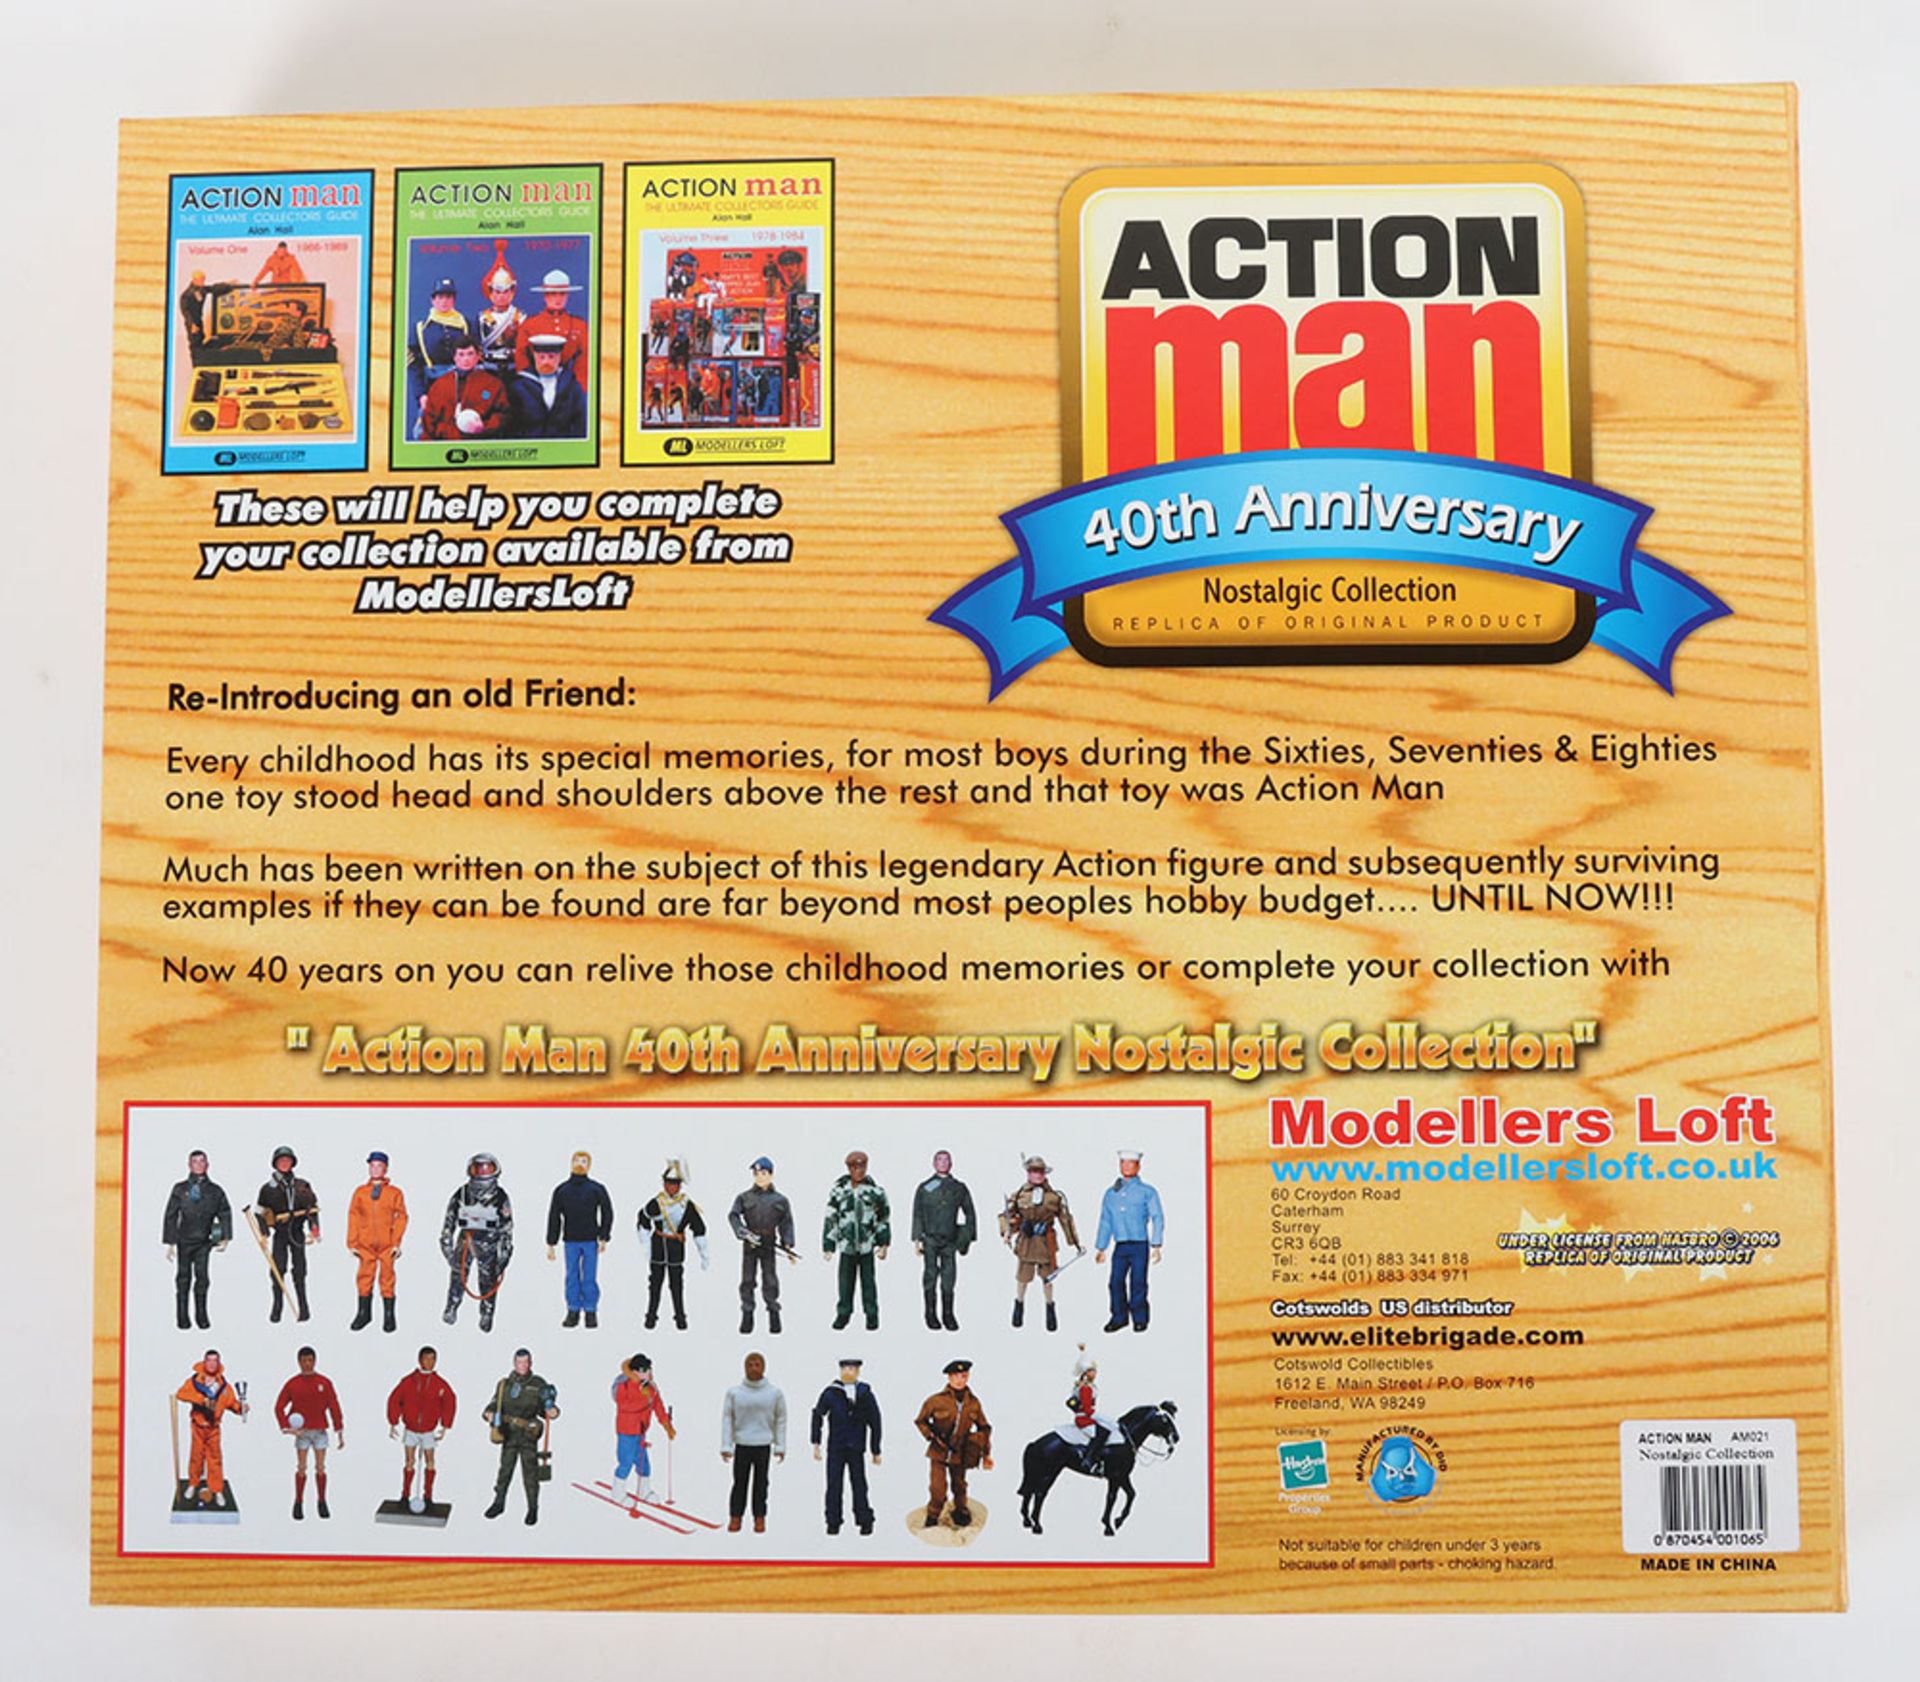 Action Man Soldiers of The Century British Infantryman 40th Anniversary Nostalgic Collection - Image 2 of 4